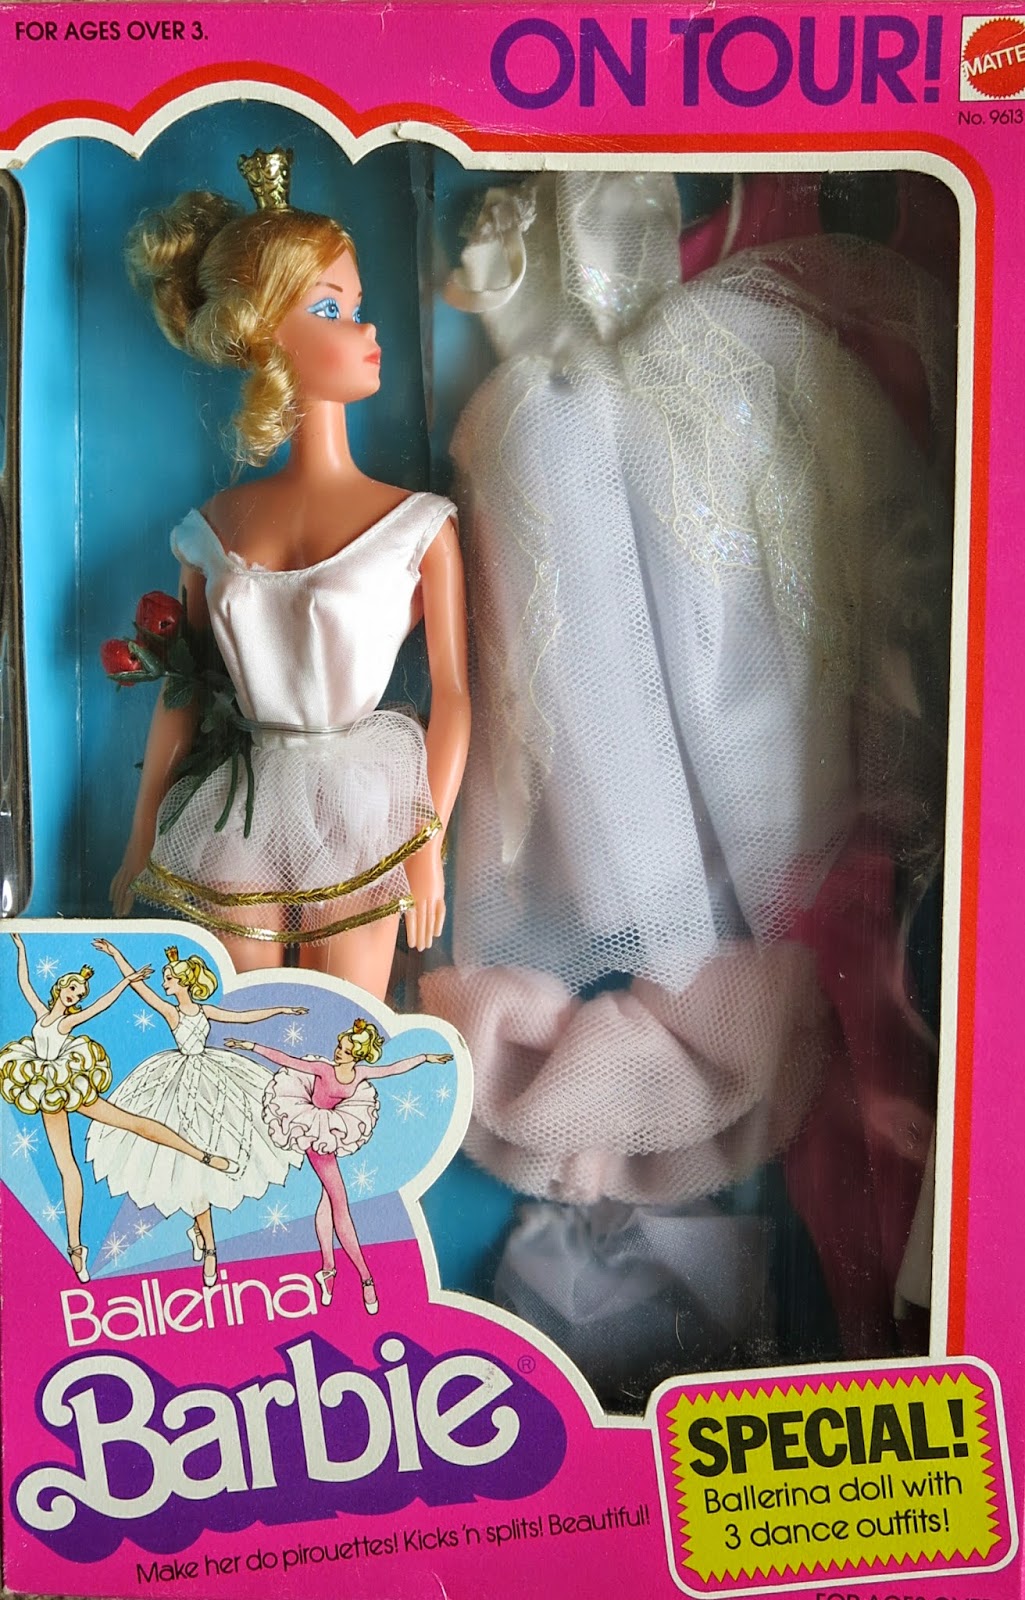 My Vintage Barbies Blog: Barbie of the Month: Ballerina on Tour